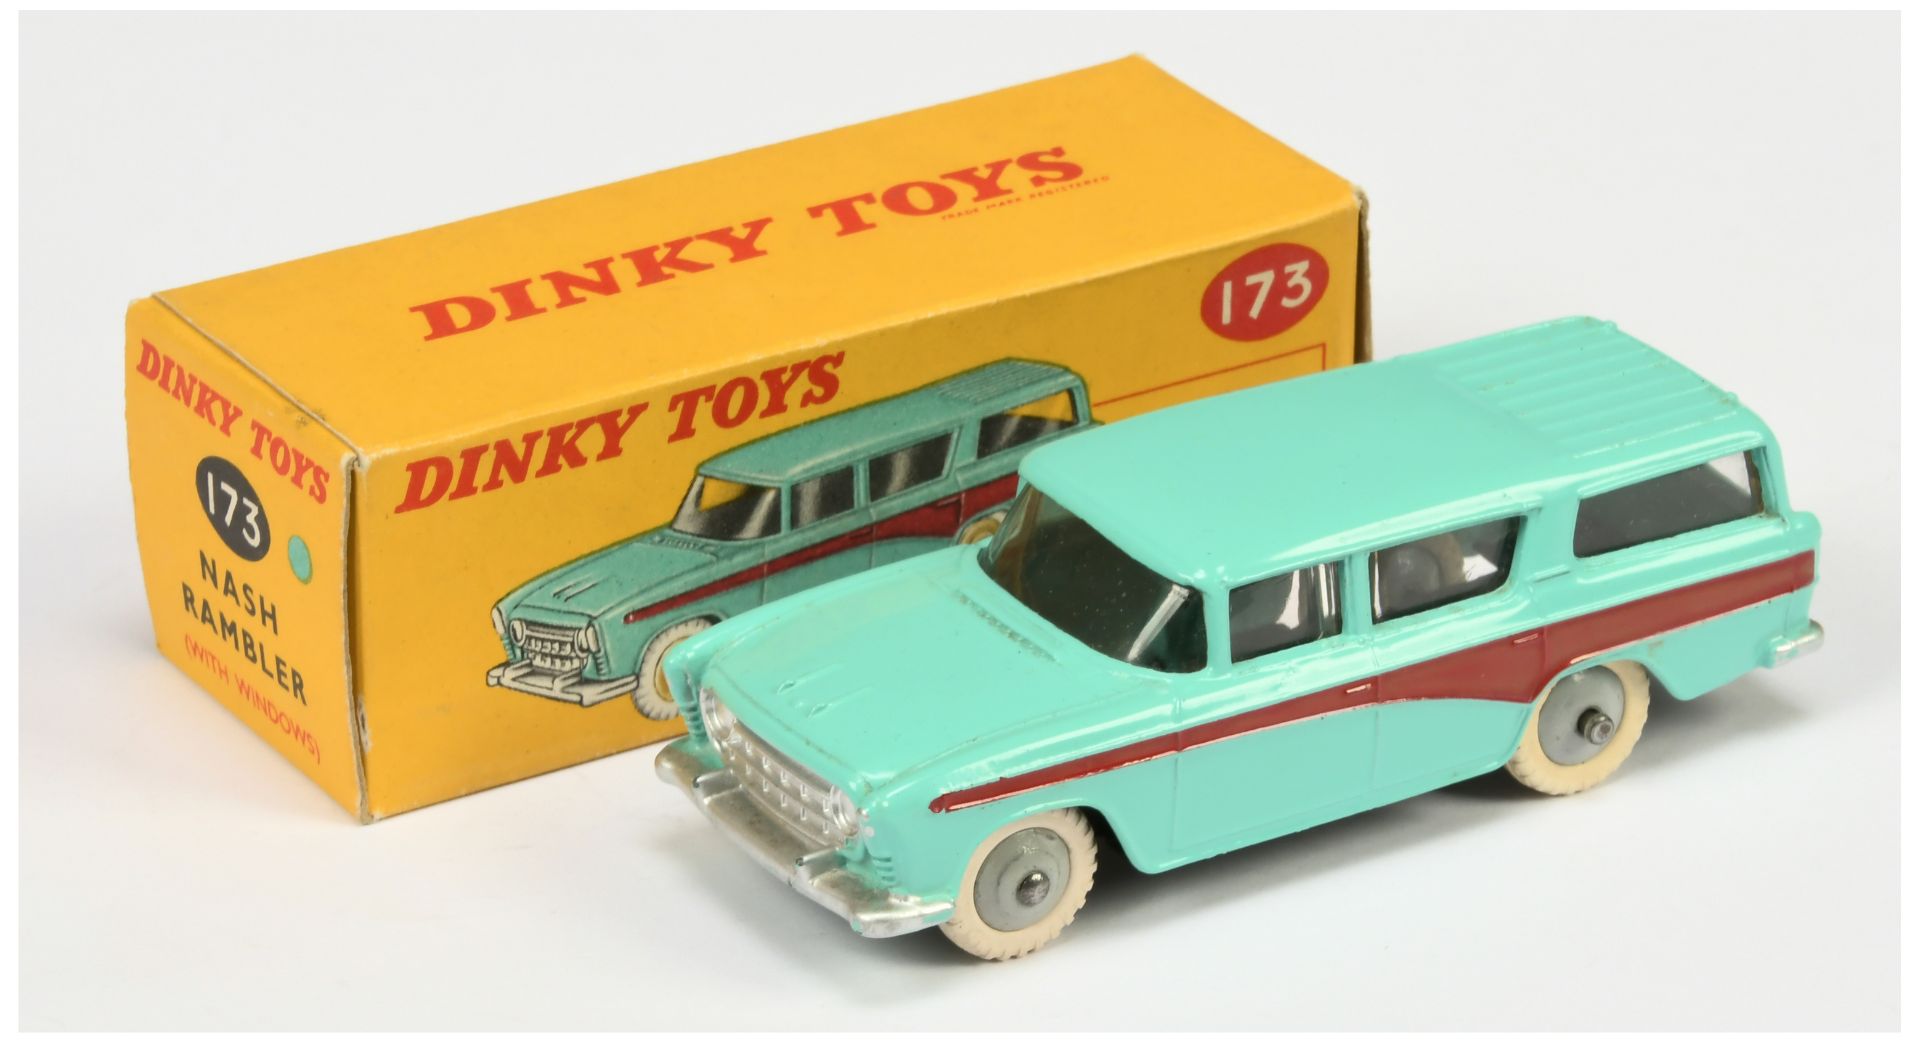 Dinky Toys 173 Nash Rambler - Turquoise body, maroon side flashes, silver trim and grey rigid hub...